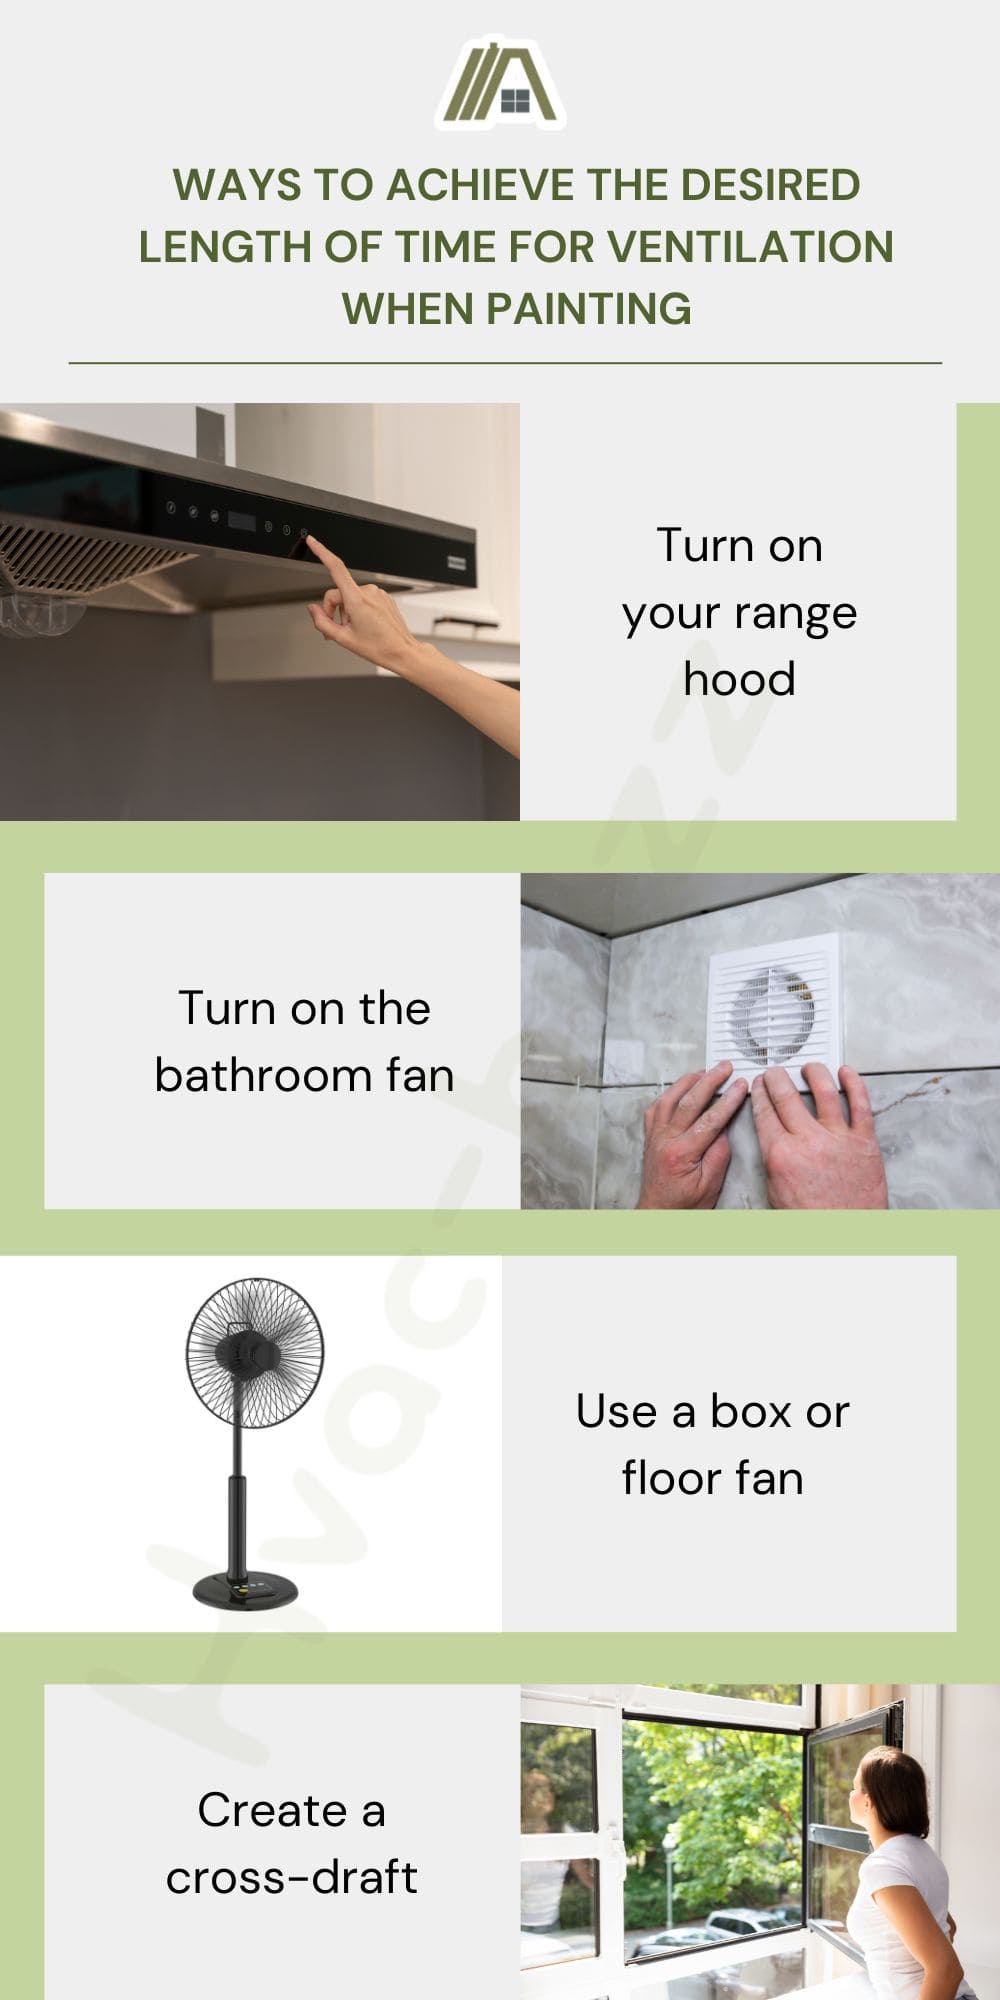 Ways to achieve the desired length of time for ventilation when painting: turn on your range hood, turn on the bathroom fan, use a box or floor fan and create a cross-draft